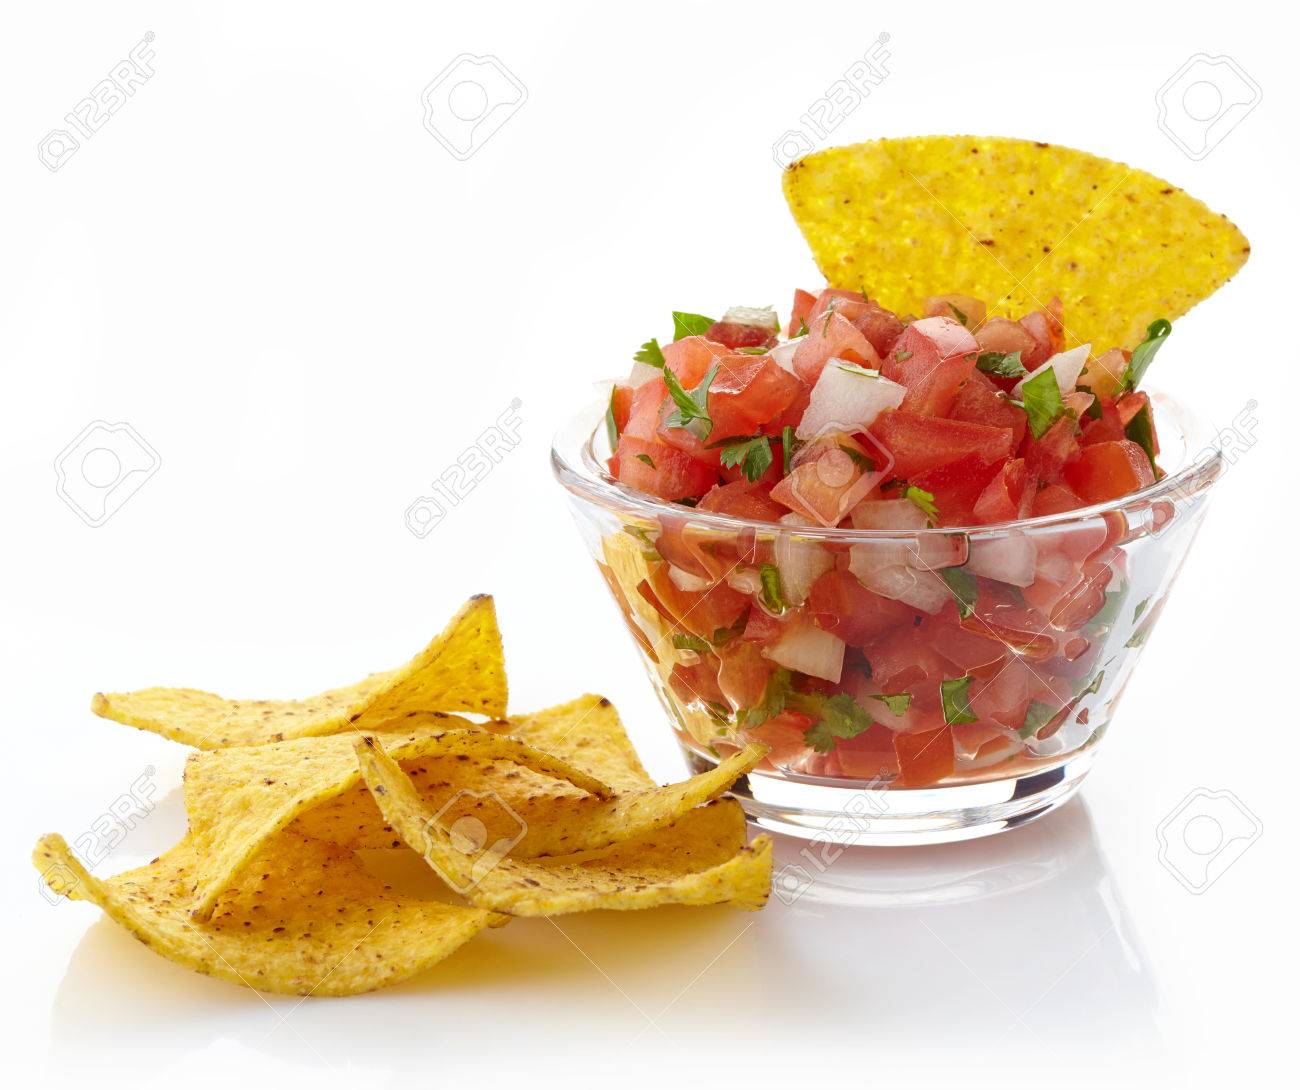 Bowl Of Salsa Dip And Nachos Isolated On White Background Stock